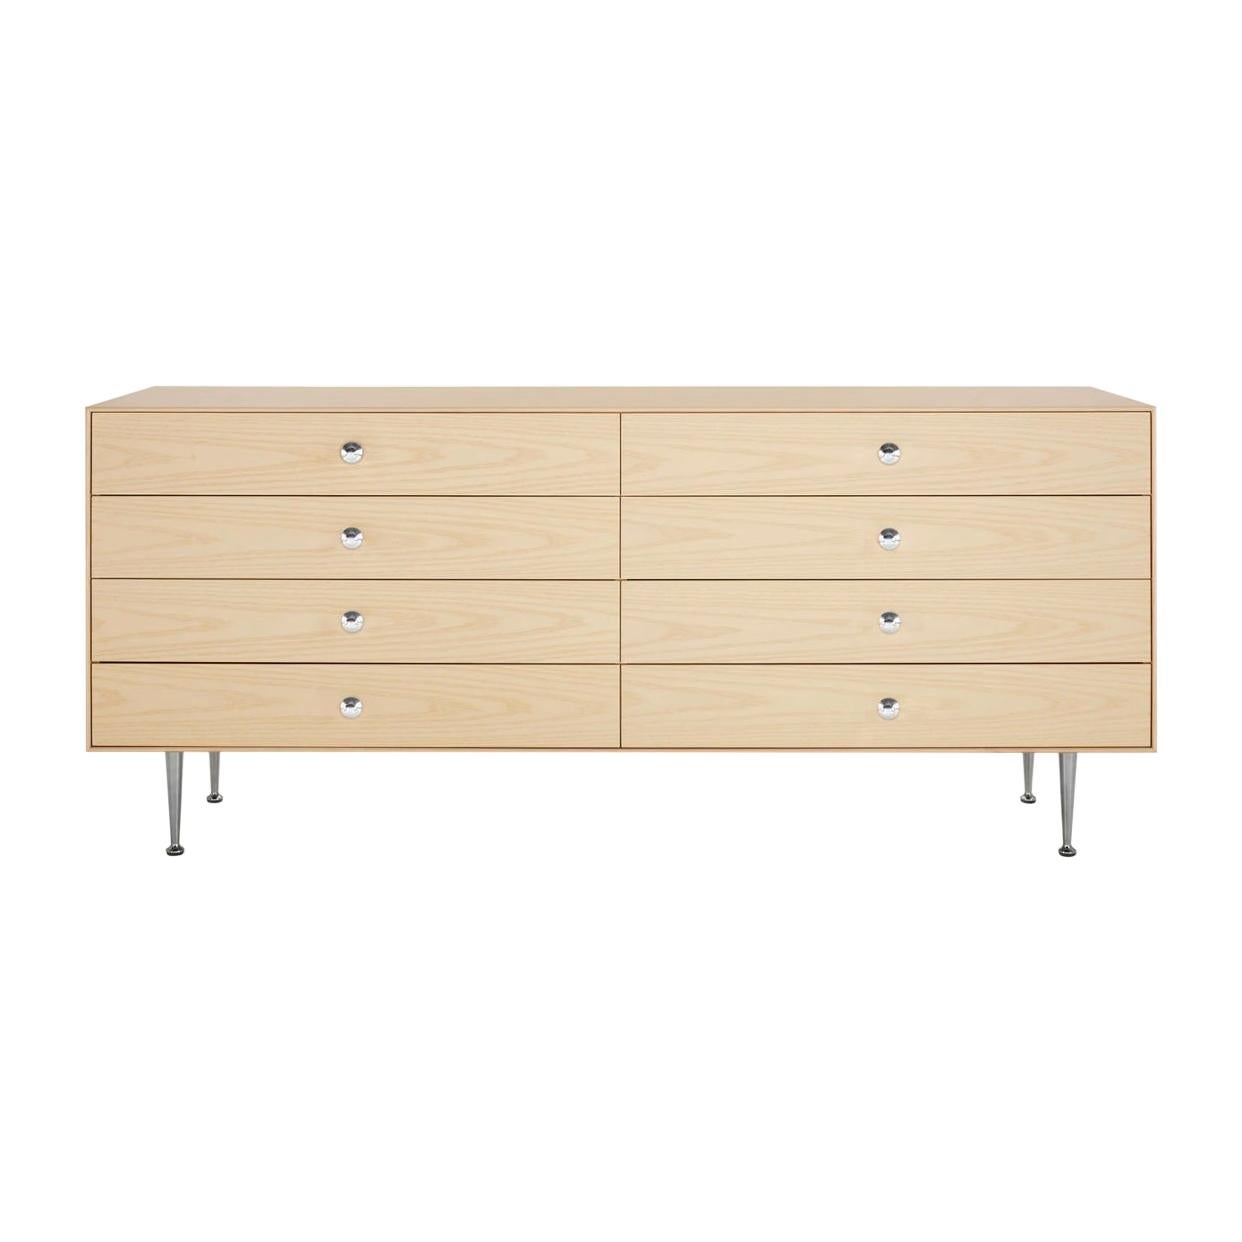 George Nelson for Herman Miller Thin Edge Double Dresser, Chest of Drawers, Ash